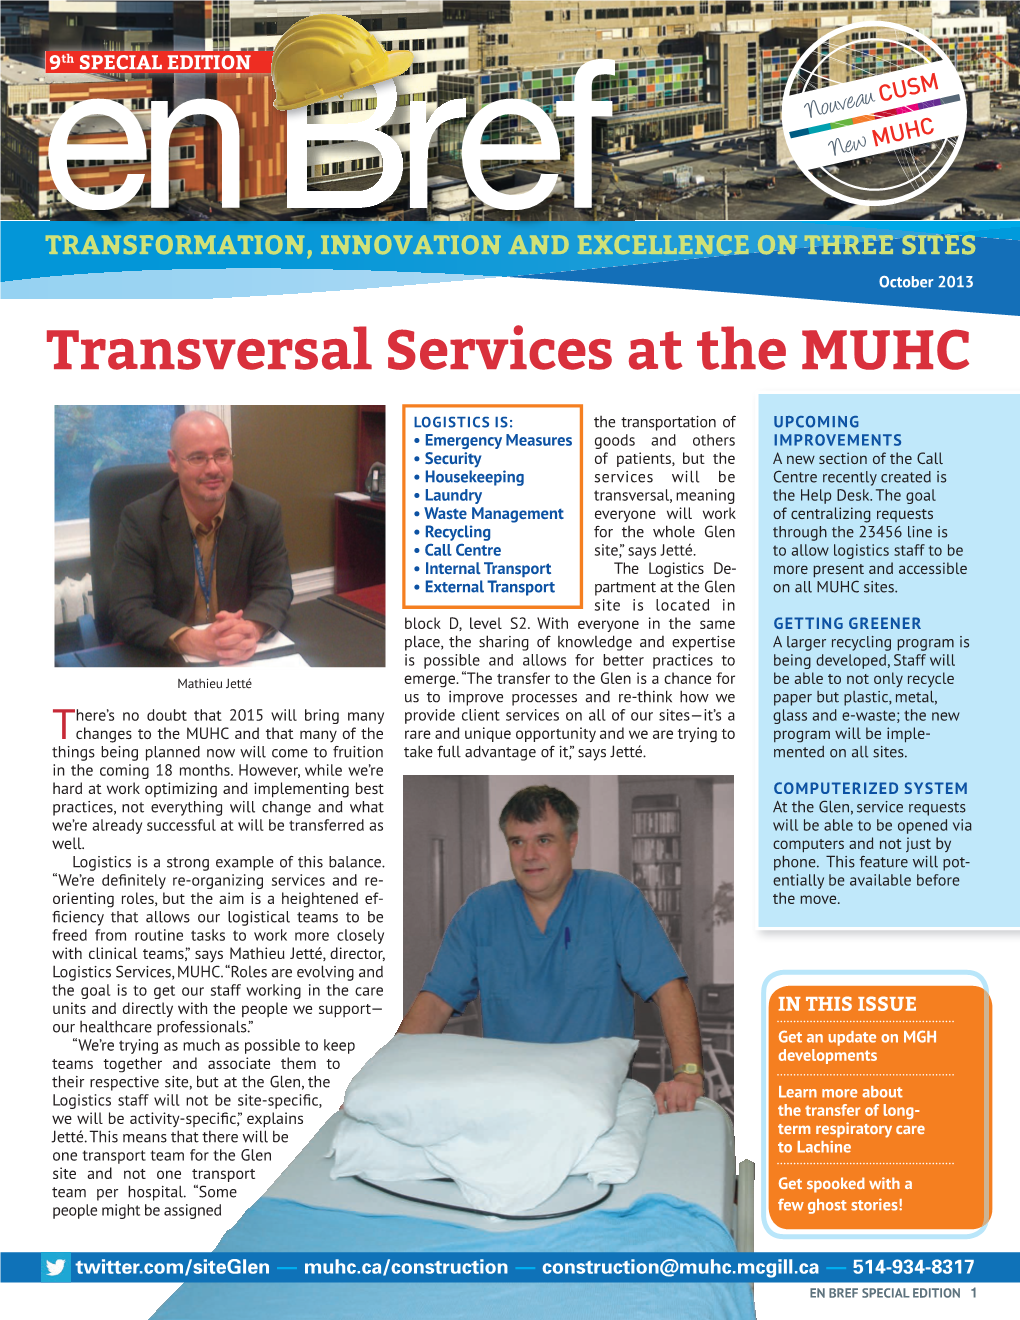 Transversal Services at the MUHC